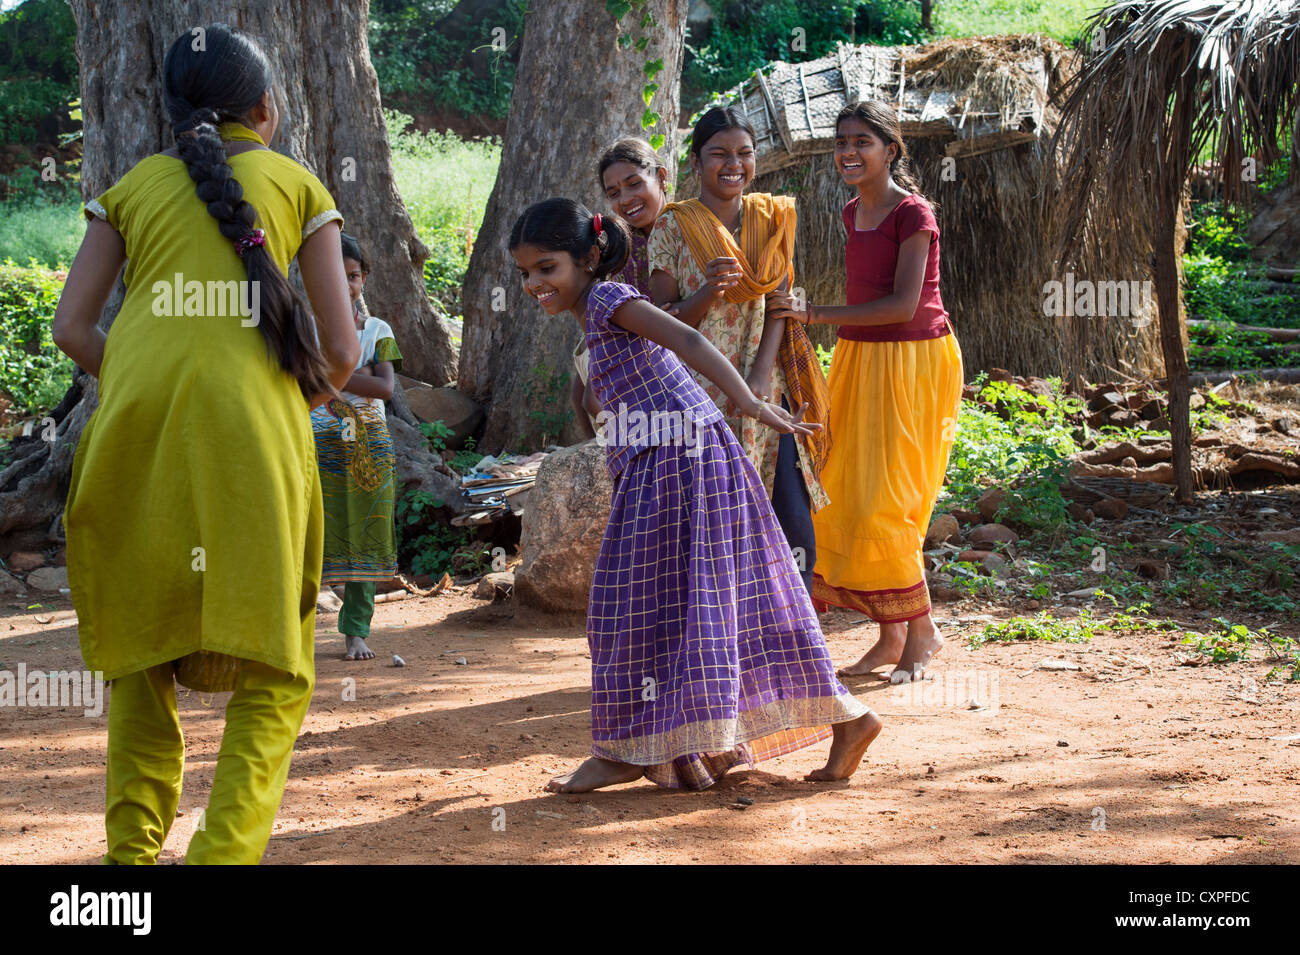 Indian Girls Laughing Whilst Playing Games In A Rural Indian Village